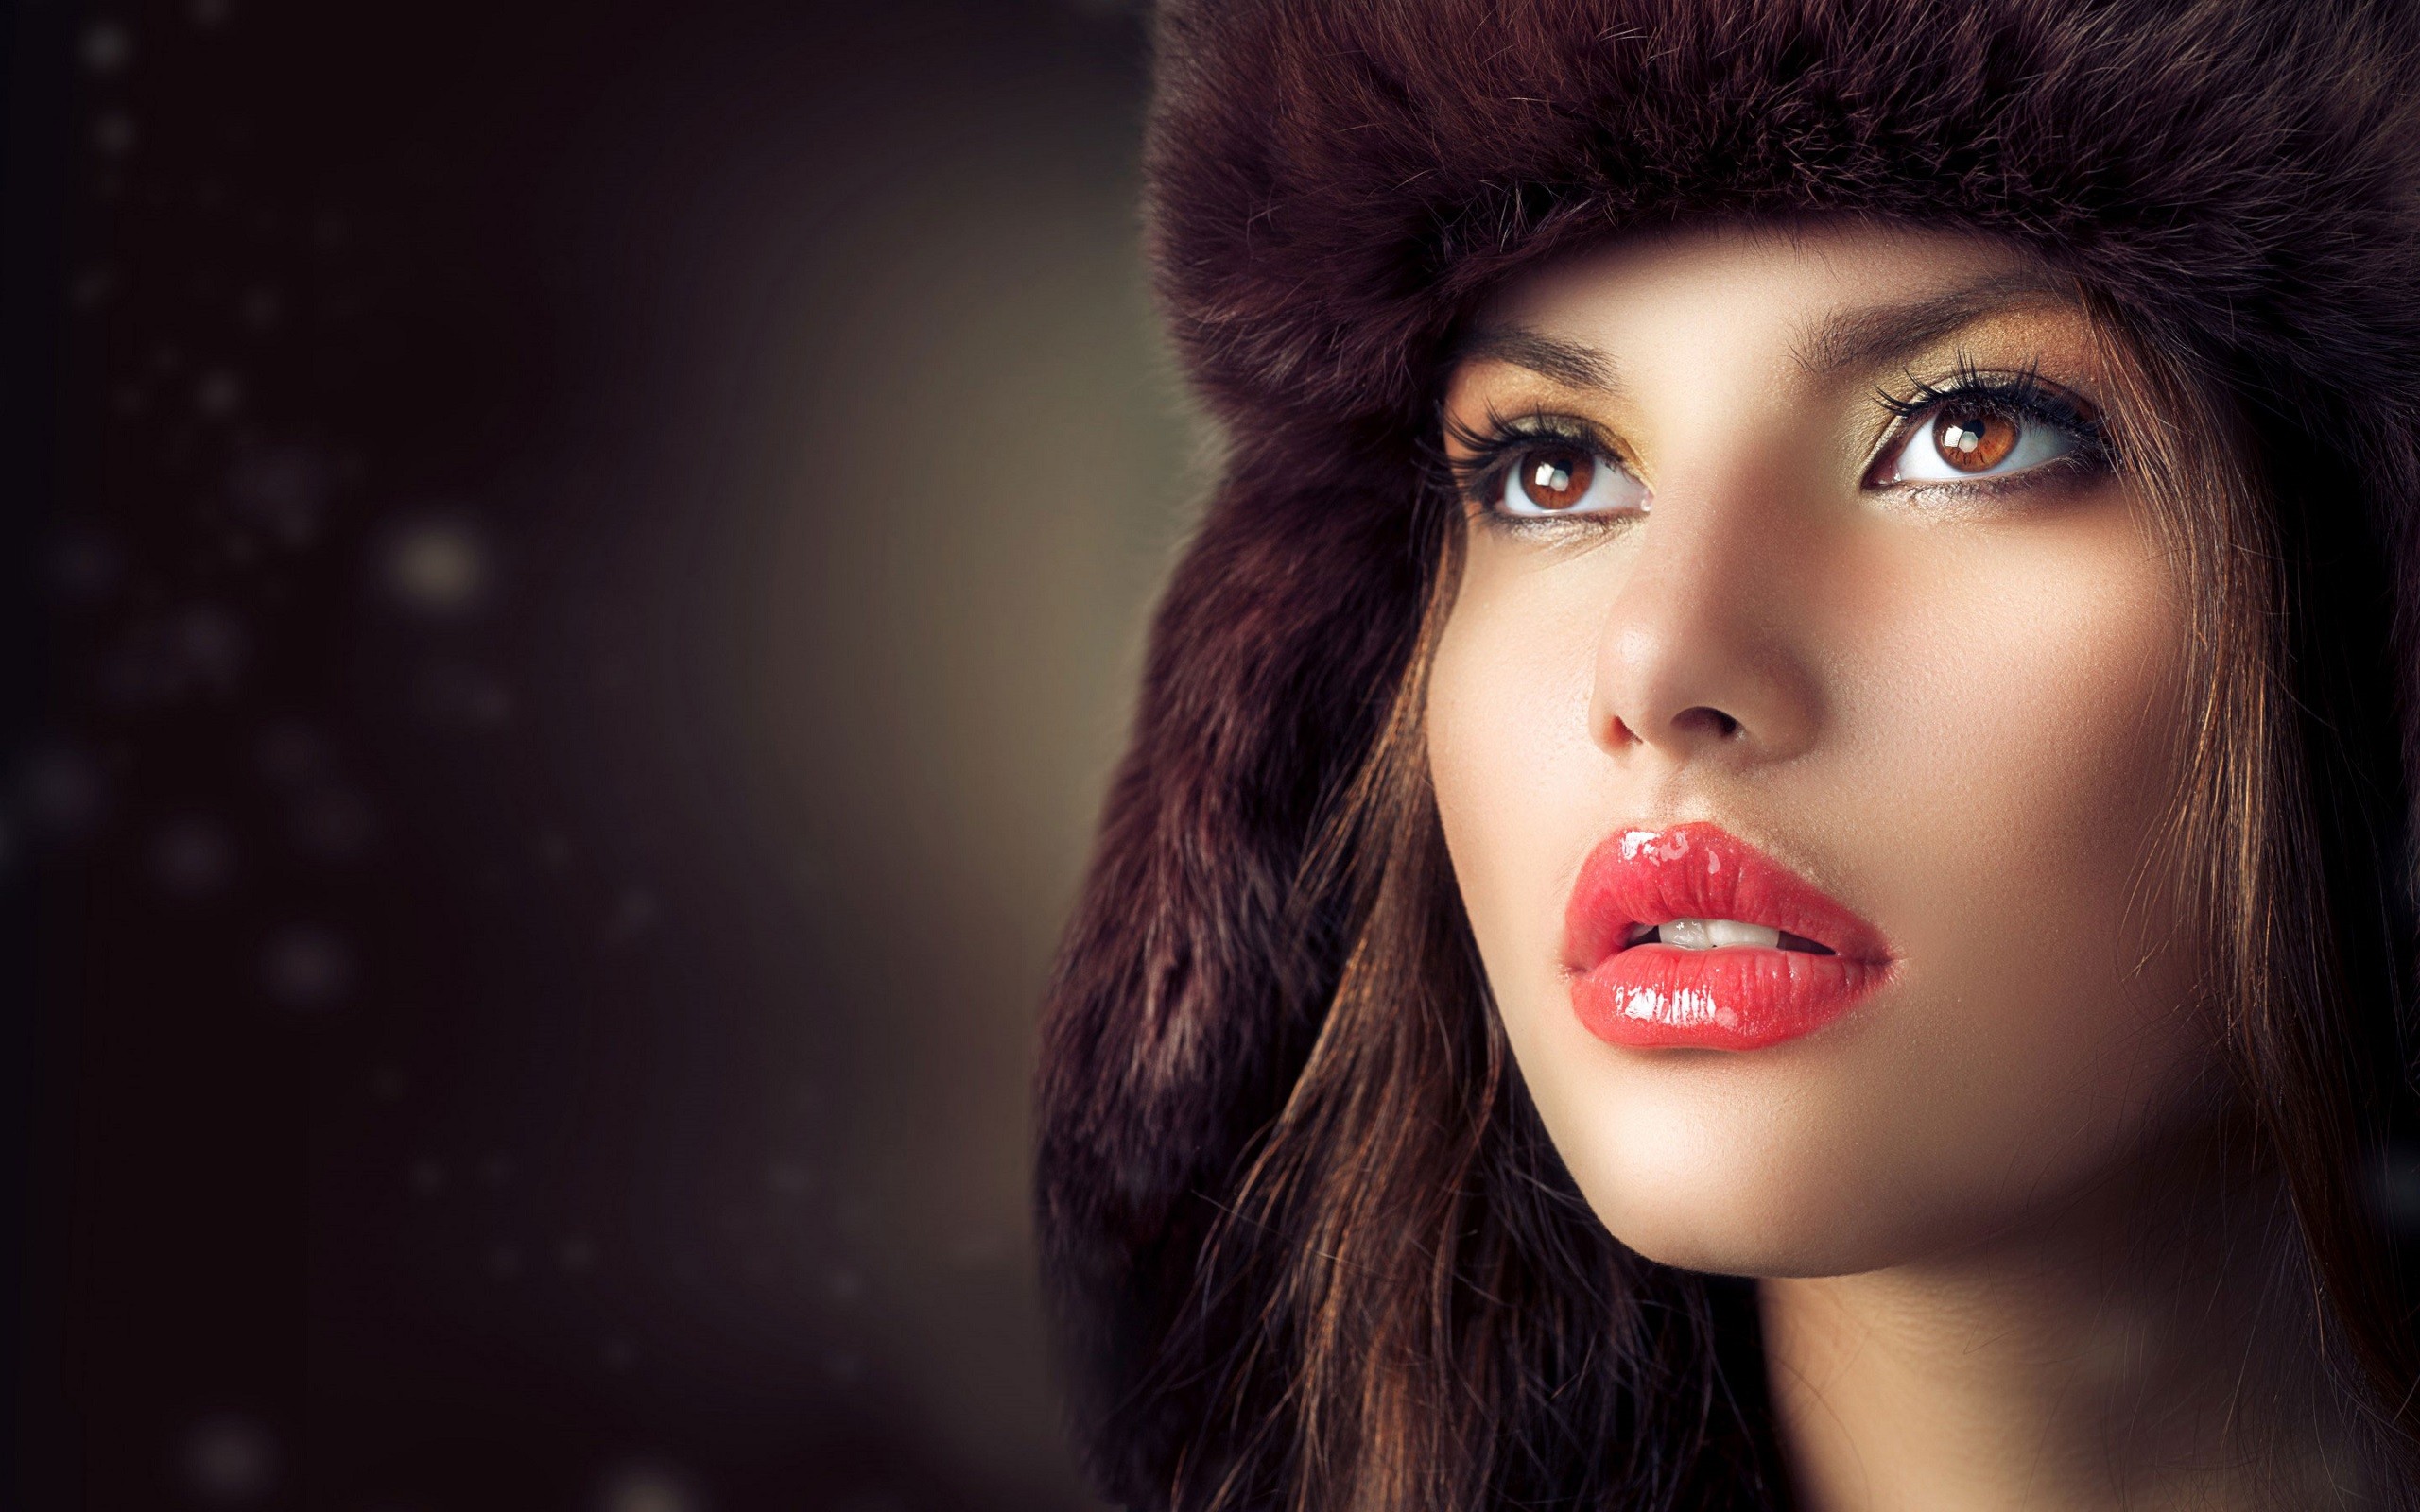 Women Face Hat Red Lipstick Brown Eyes Open Mouth Looking Away Looking Into The Distance Model Brune 2560x1600